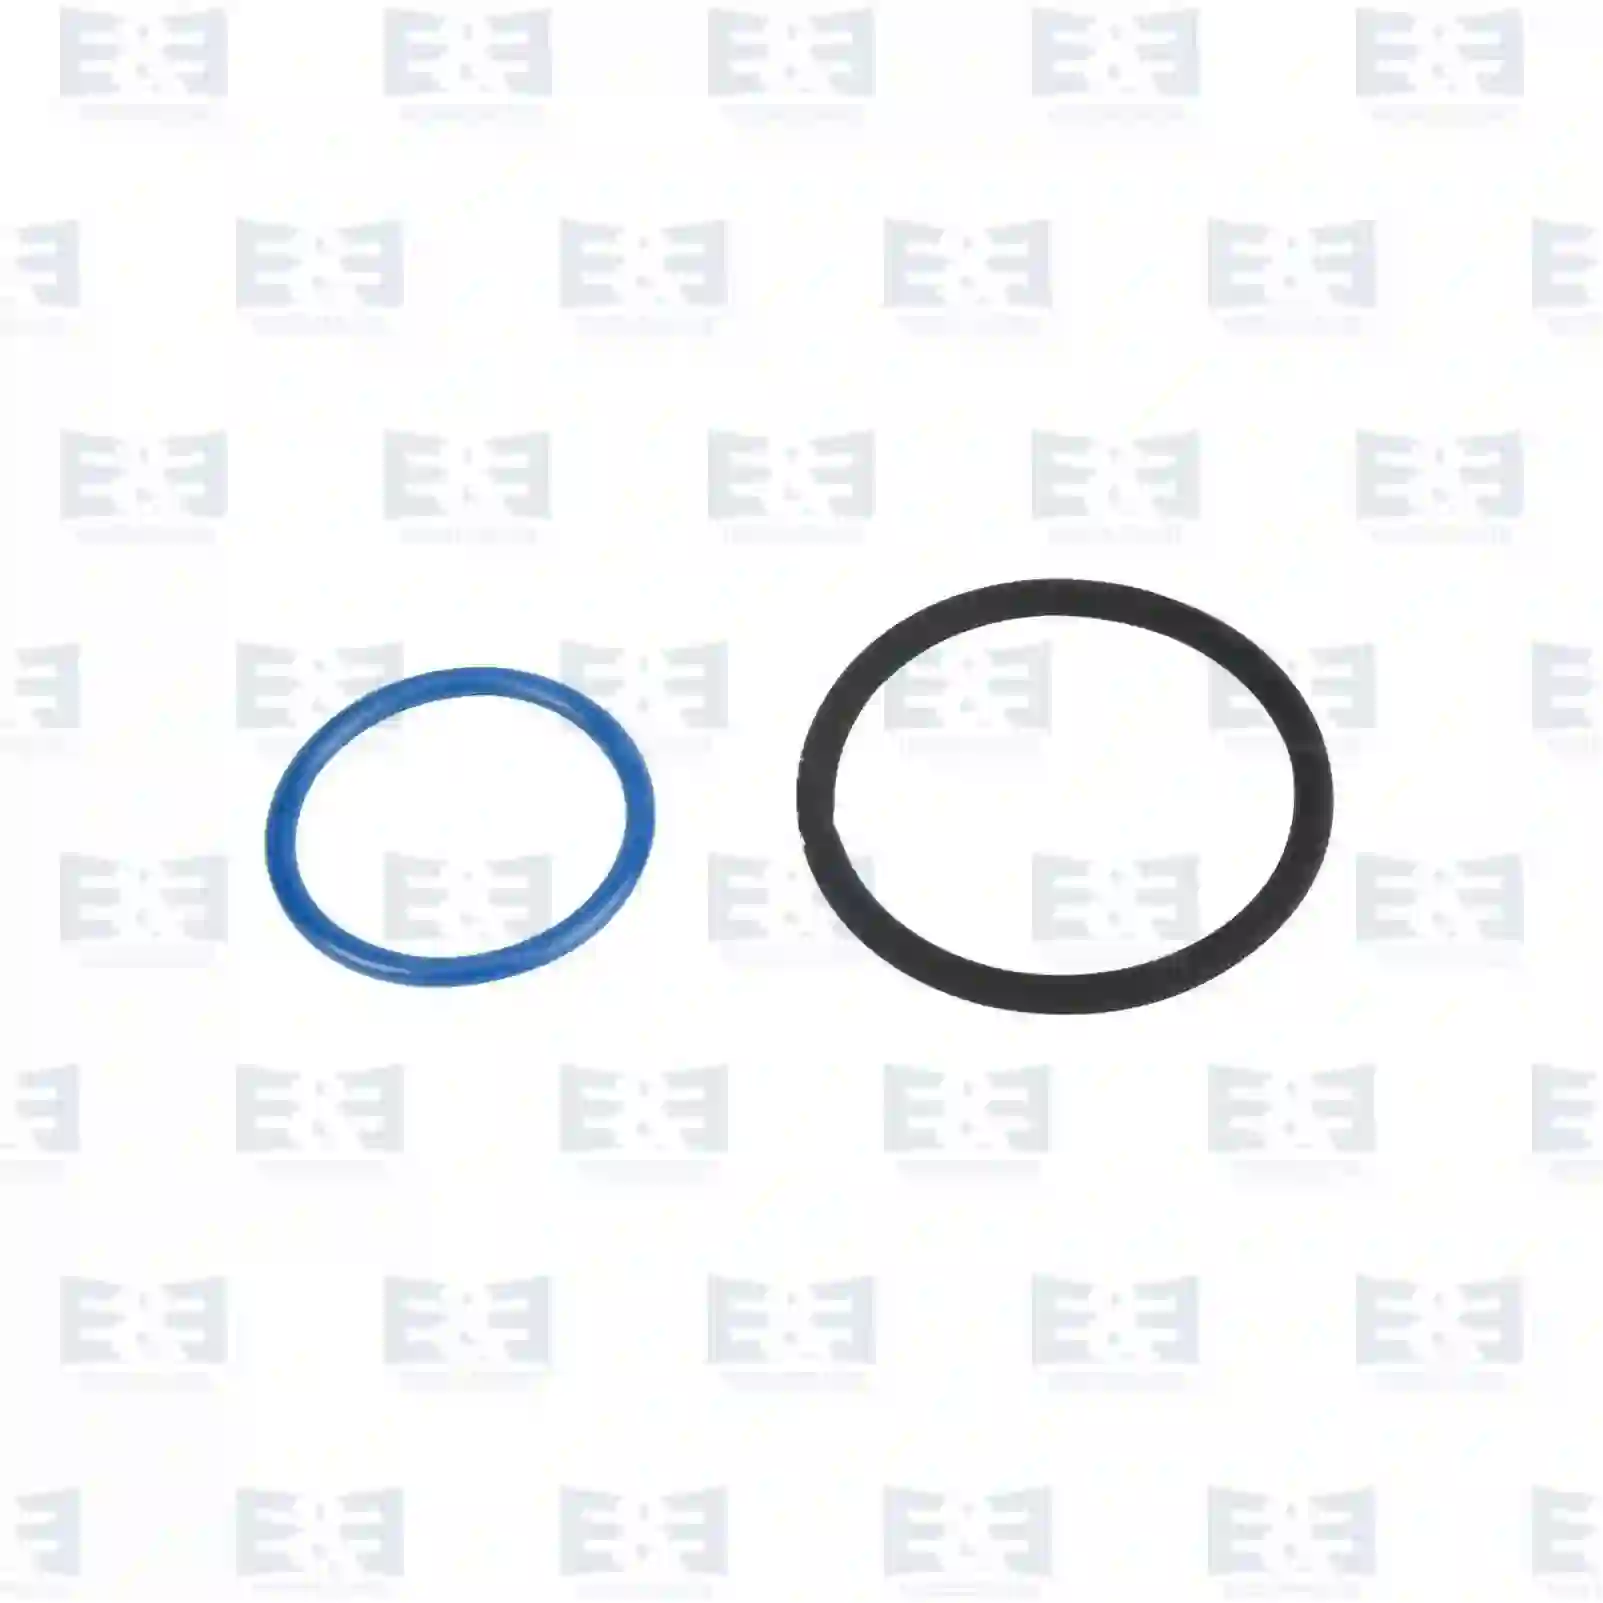  O-ring kit || E&E Truck Spare Parts | Truck Spare Parts, Auotomotive Spare Parts